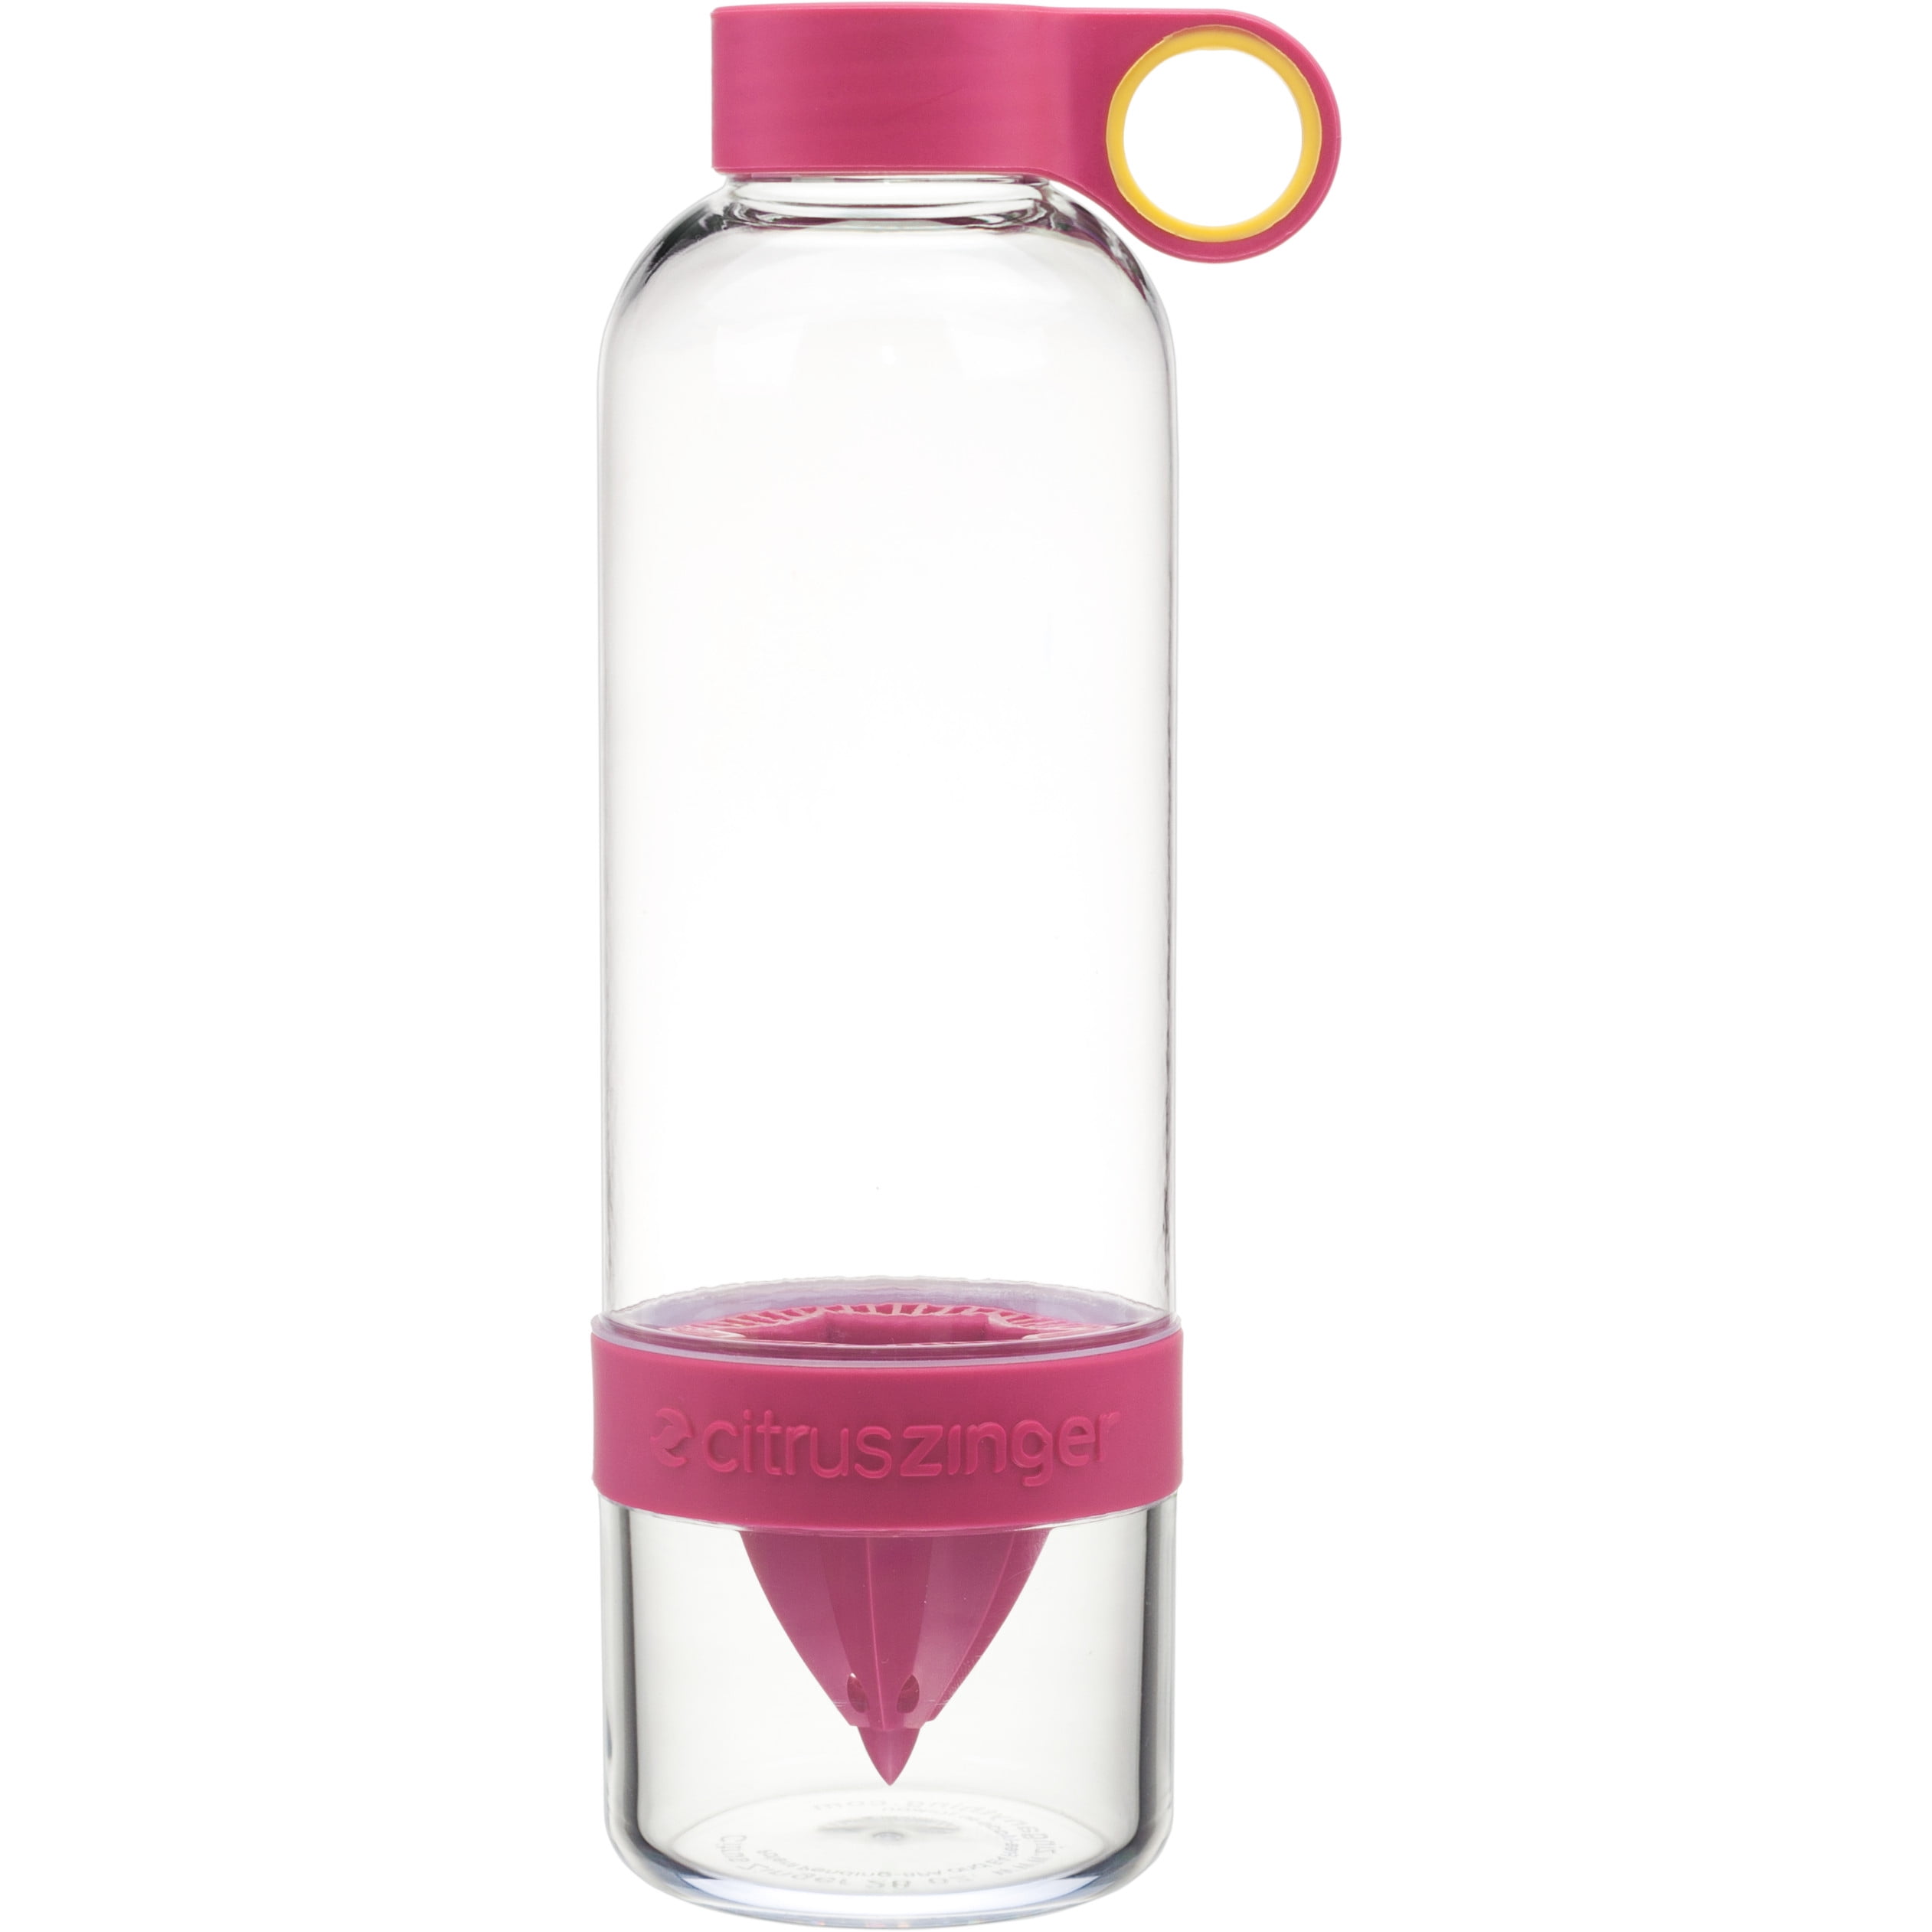 Citrus Zinger? Sip by Zing Anything, Active Infusion Water Bottle